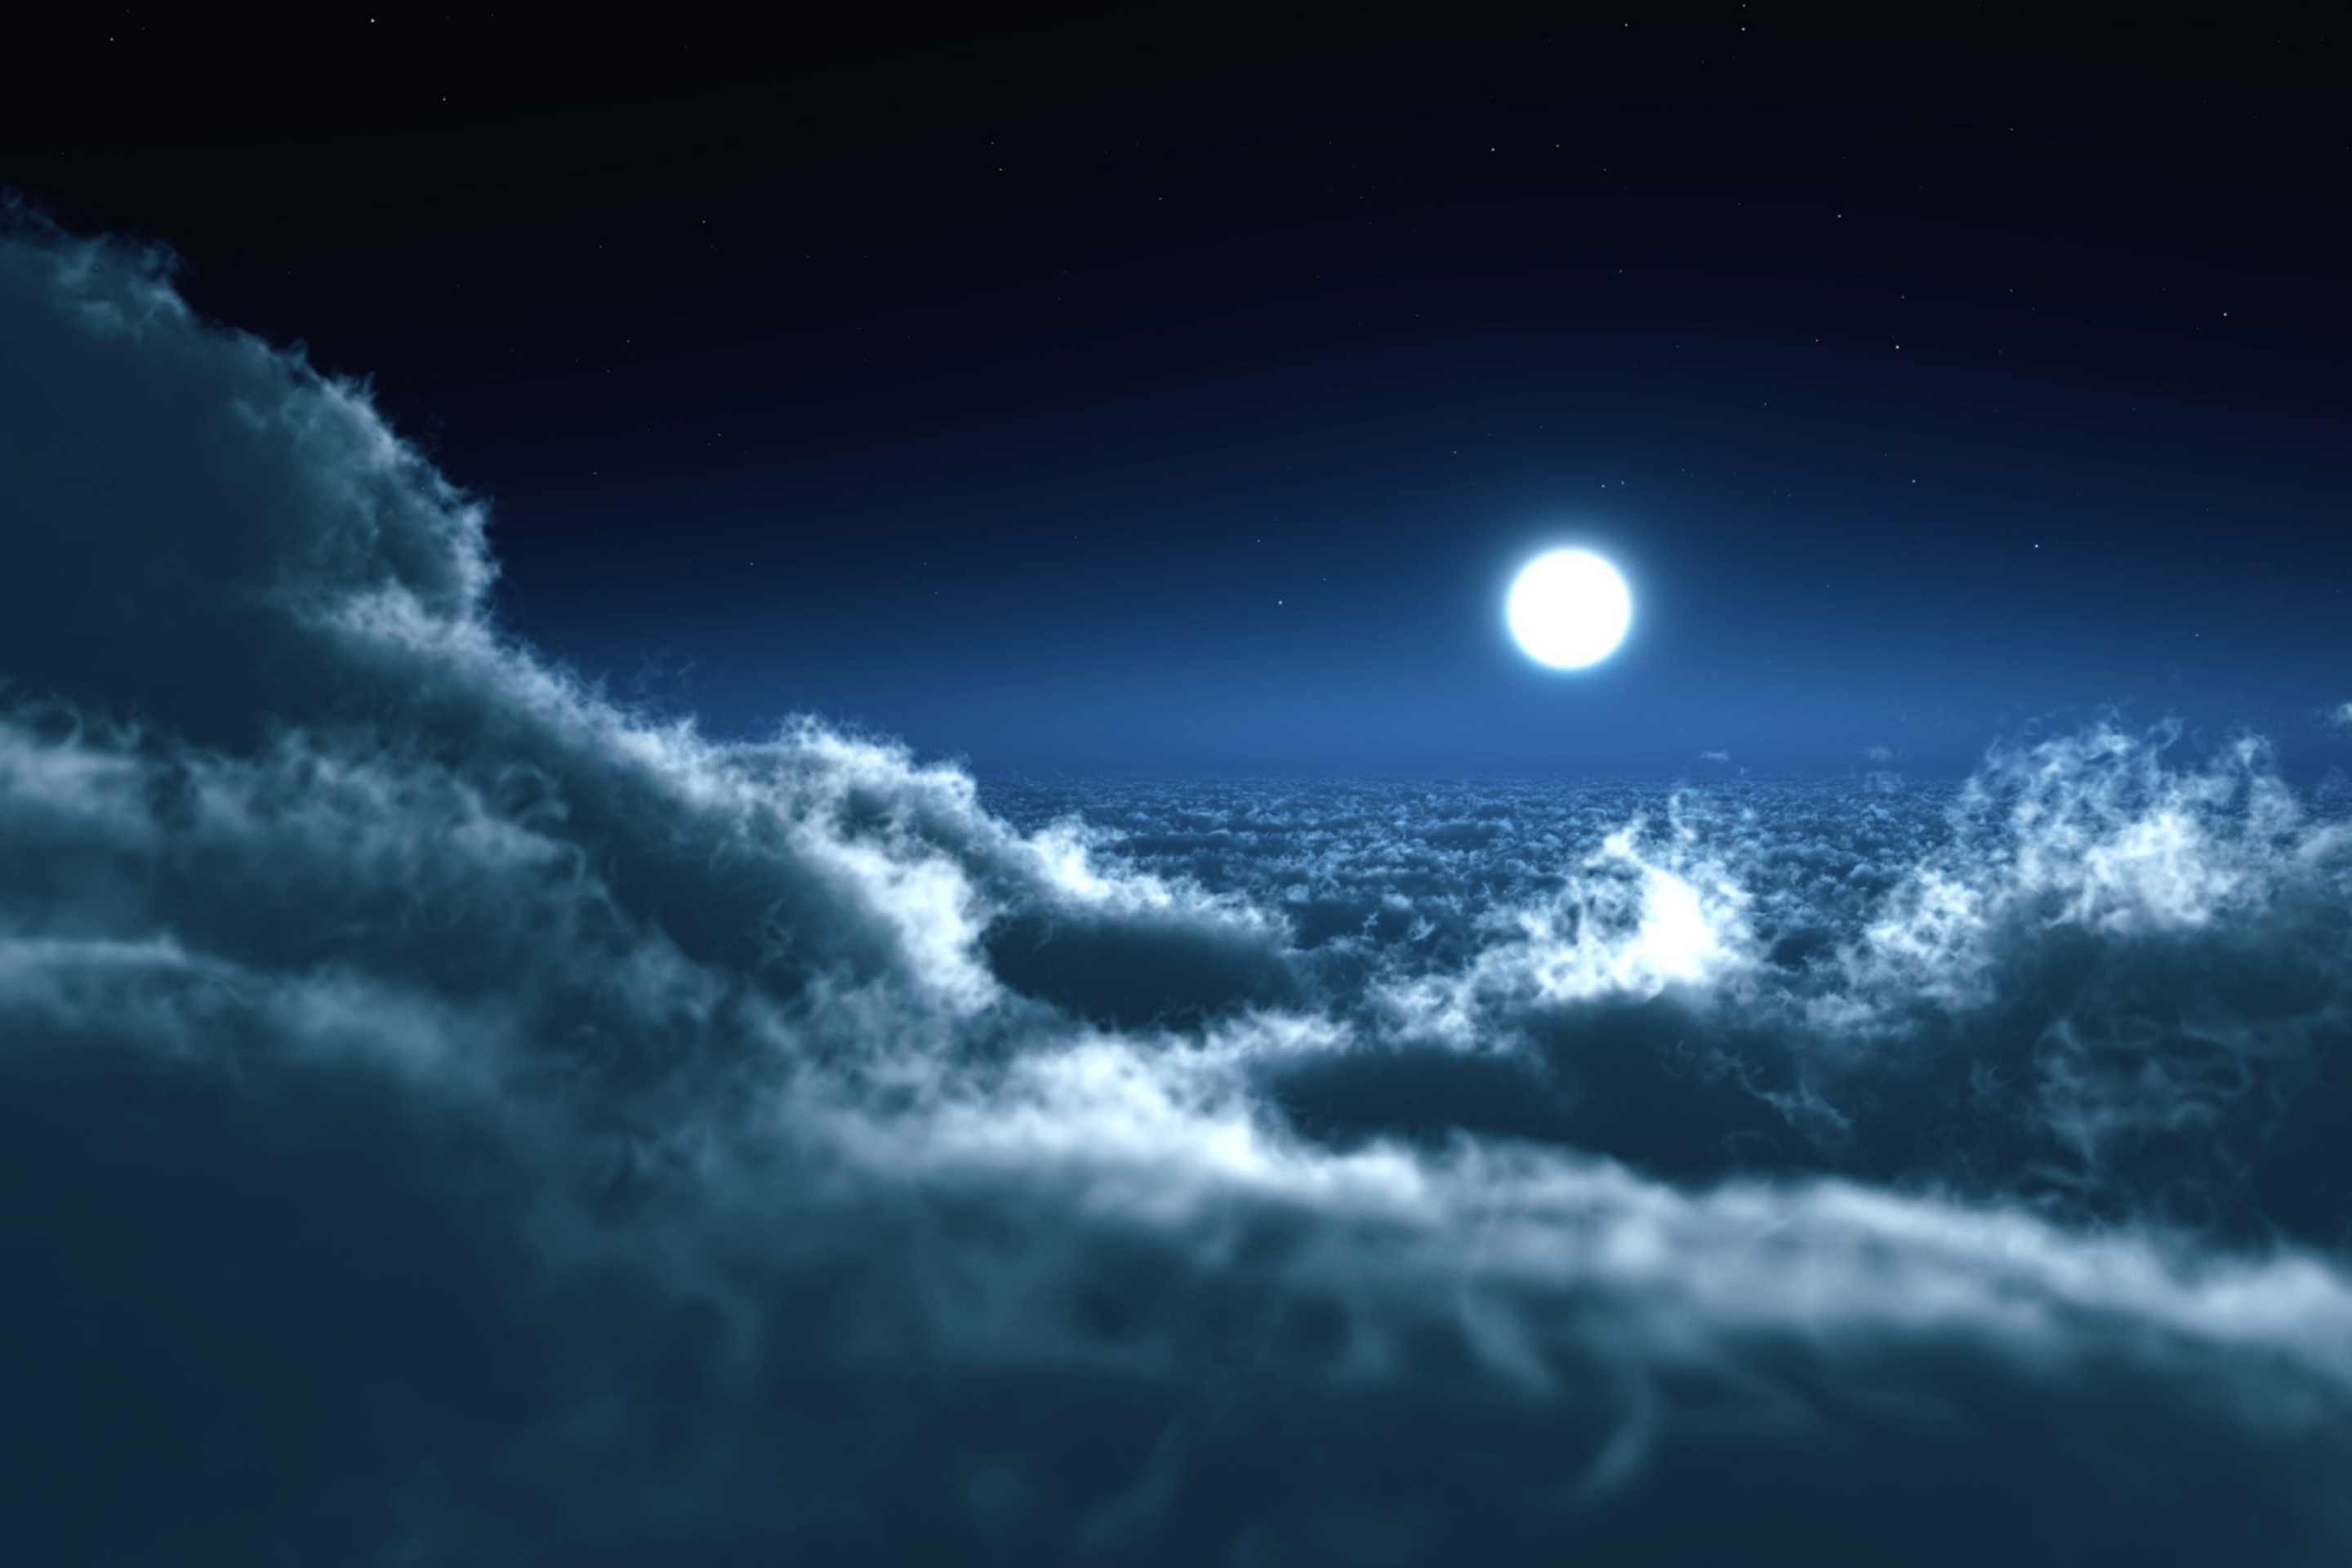 Moon Over Clouds wallpaper 2880x1920